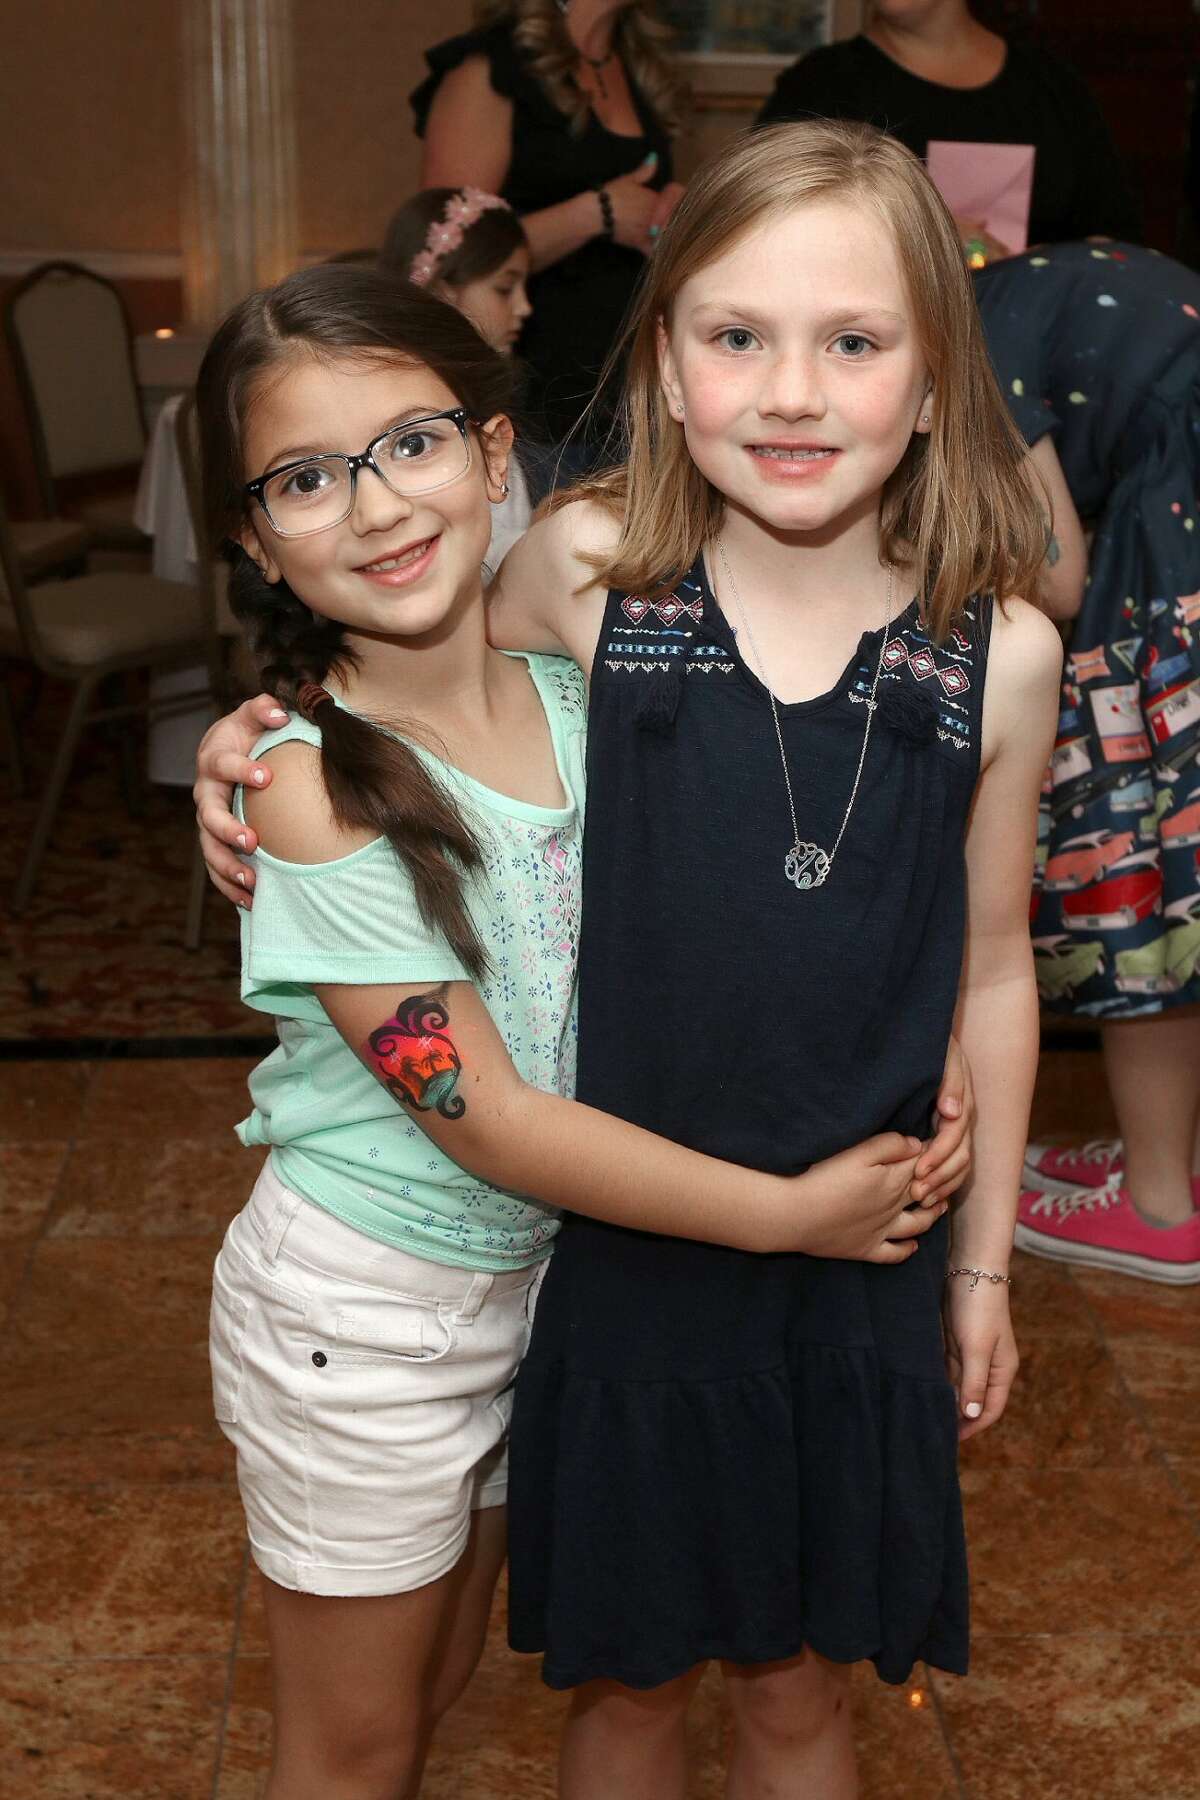 Were You Seen at the inaugural “Stella’s Dance Party”, to benefit St. Jude Children’s Research Hospital, held at Mallozzi’s in Schenectady  on Saturday, May 11, 2018? “Stella’s Dance Party” is a fundraiser that was created by eight year old Stella Mallozzi as a way to help other children.